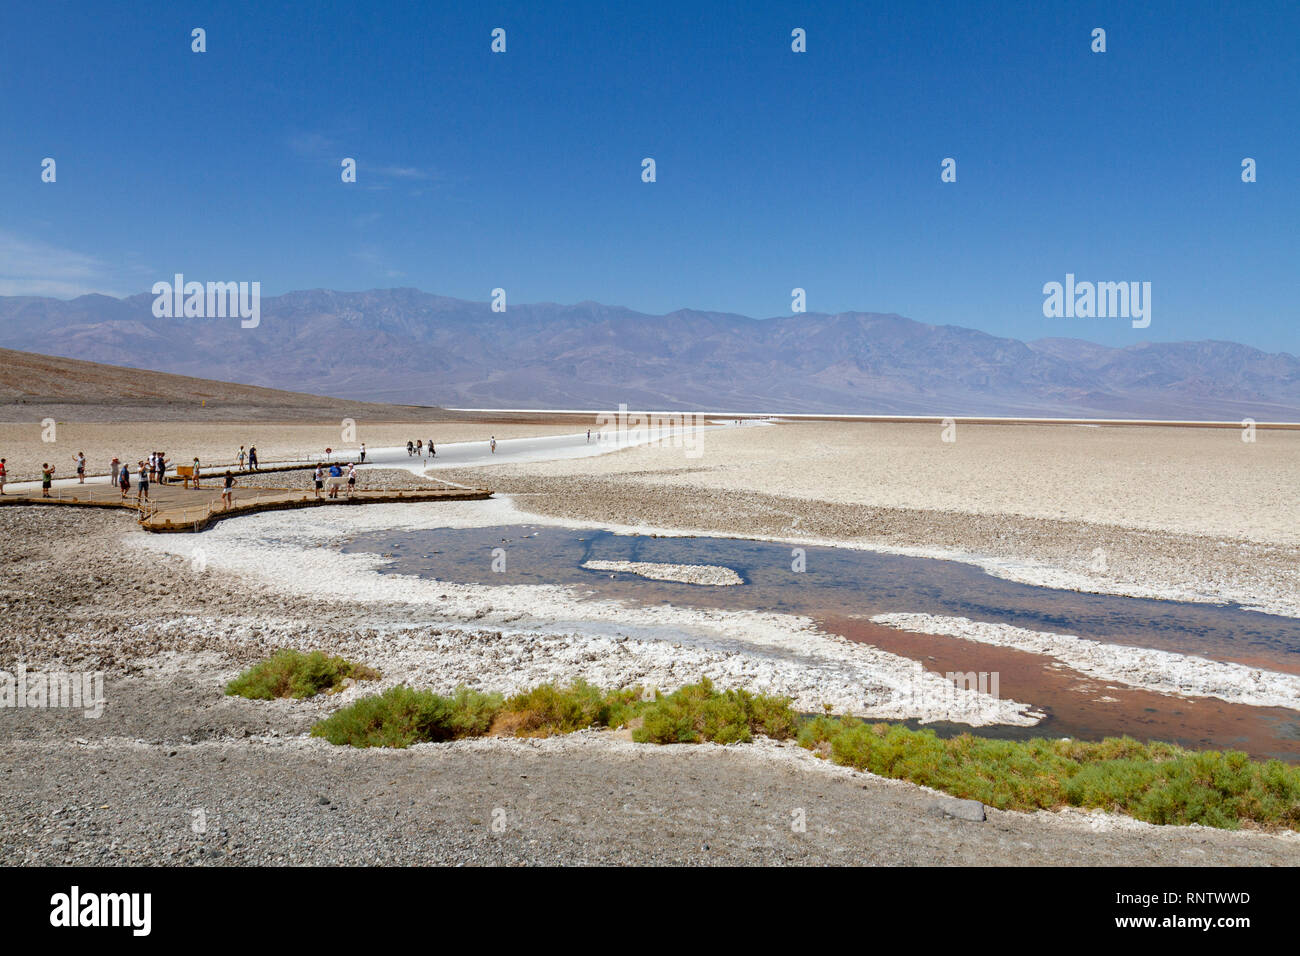 General view looking out towards Badwater Basin, Death Valley National Park, California, United States. Stock Photo